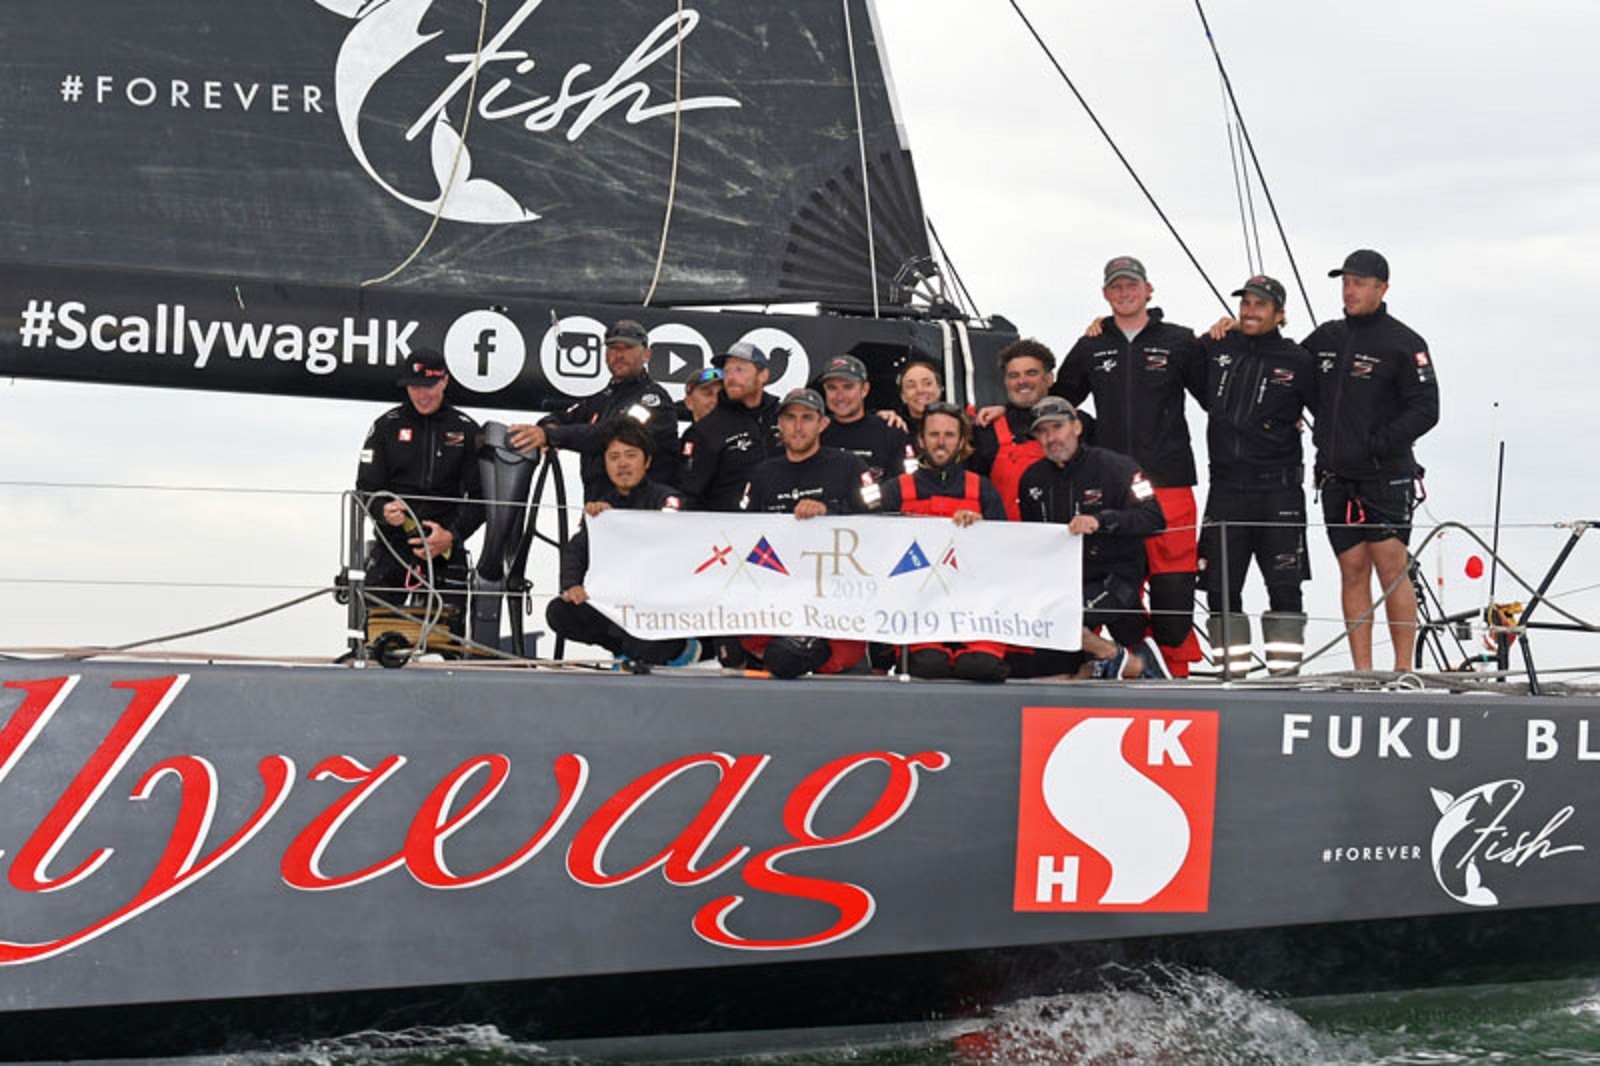 The Scallywag crew pose on the deck of their super maxi 100-footer after taking line honours in the Transatlantic Race 2019. Photo: Rick Tomlinson